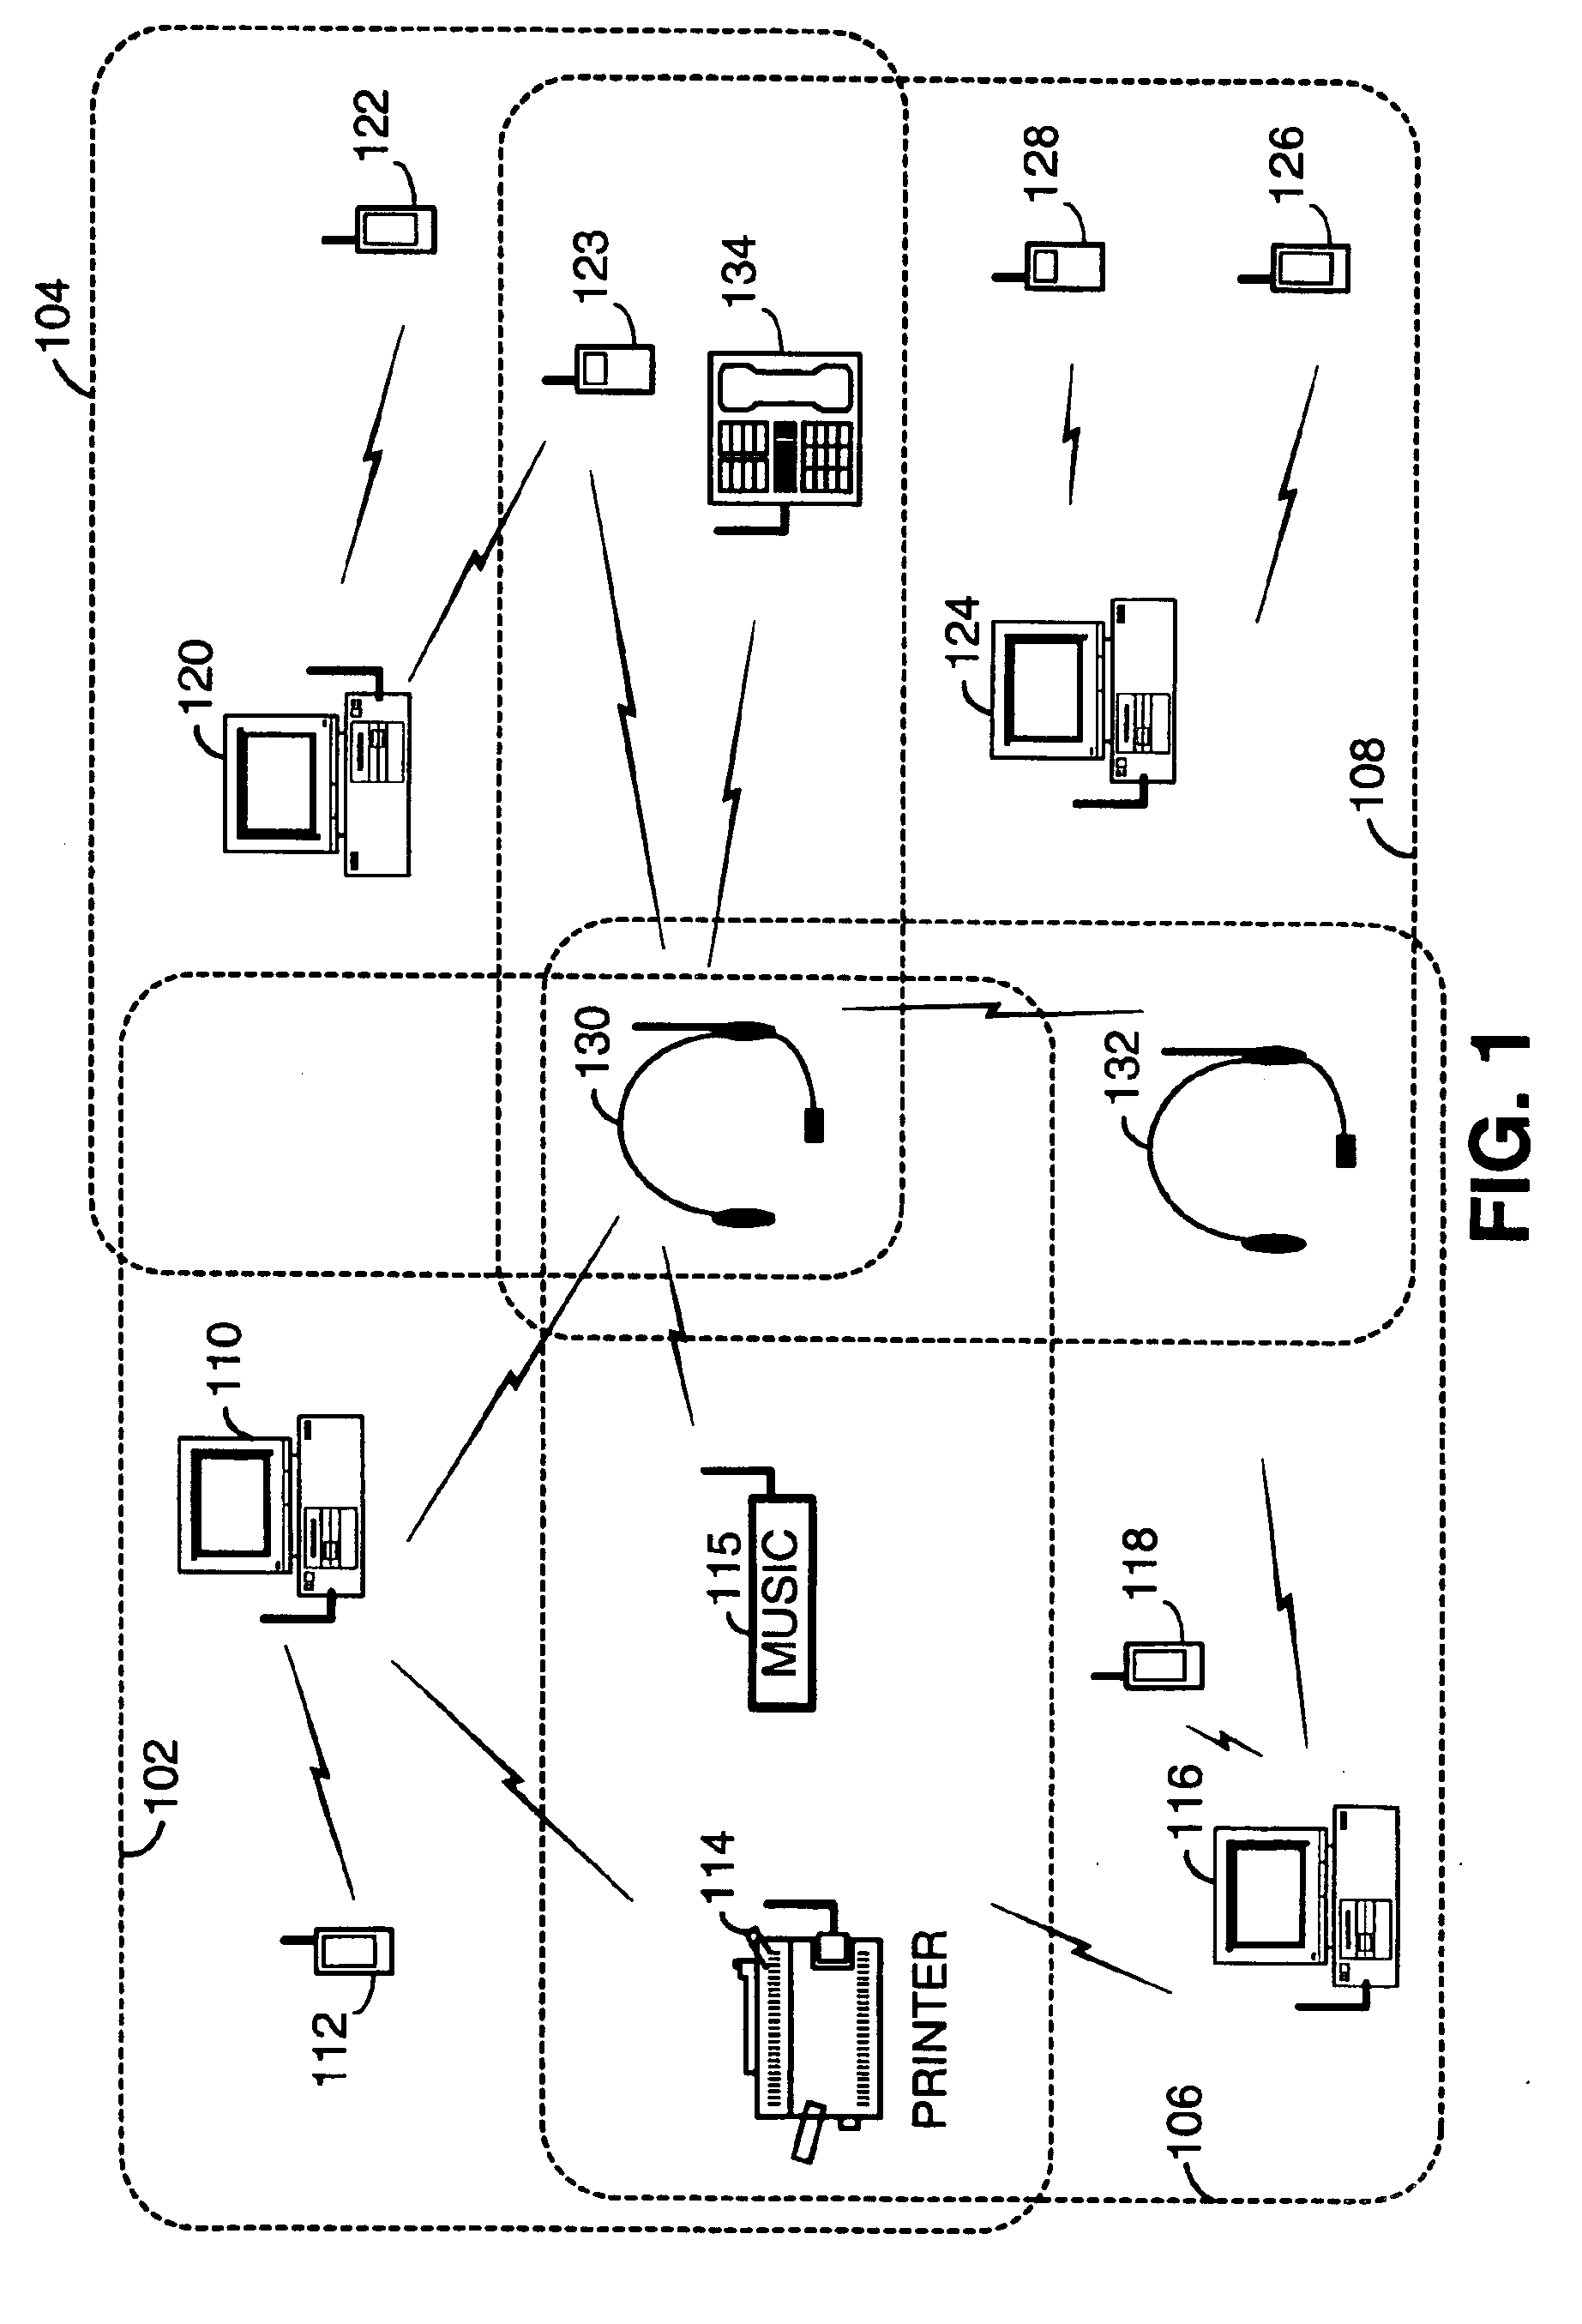 Analog to digital converter that services voice communications